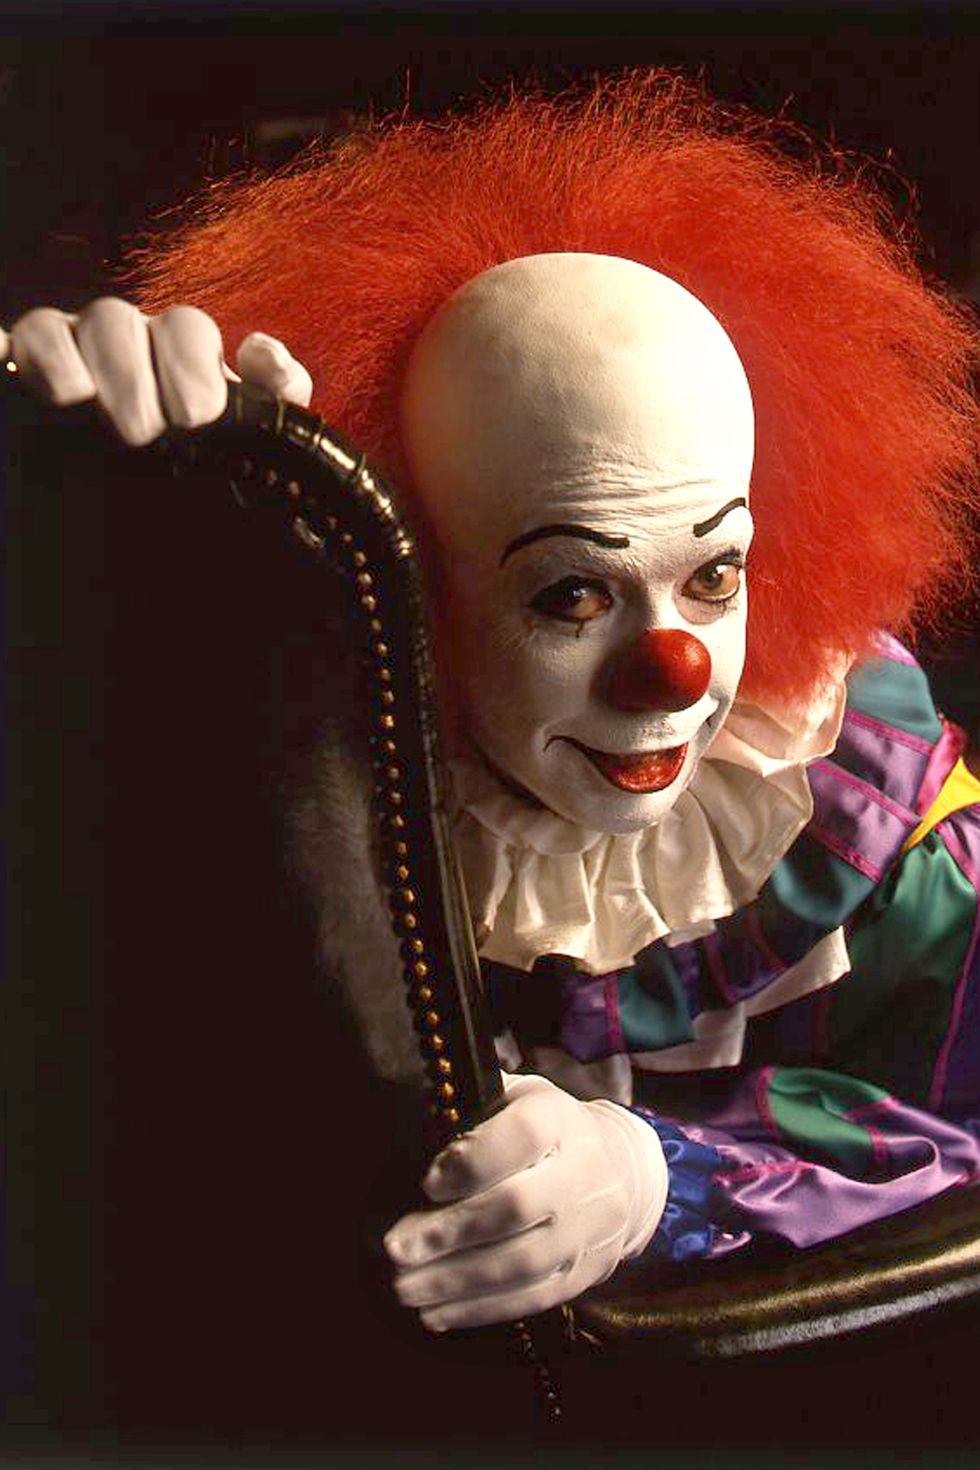 Pennywise the clown from IT